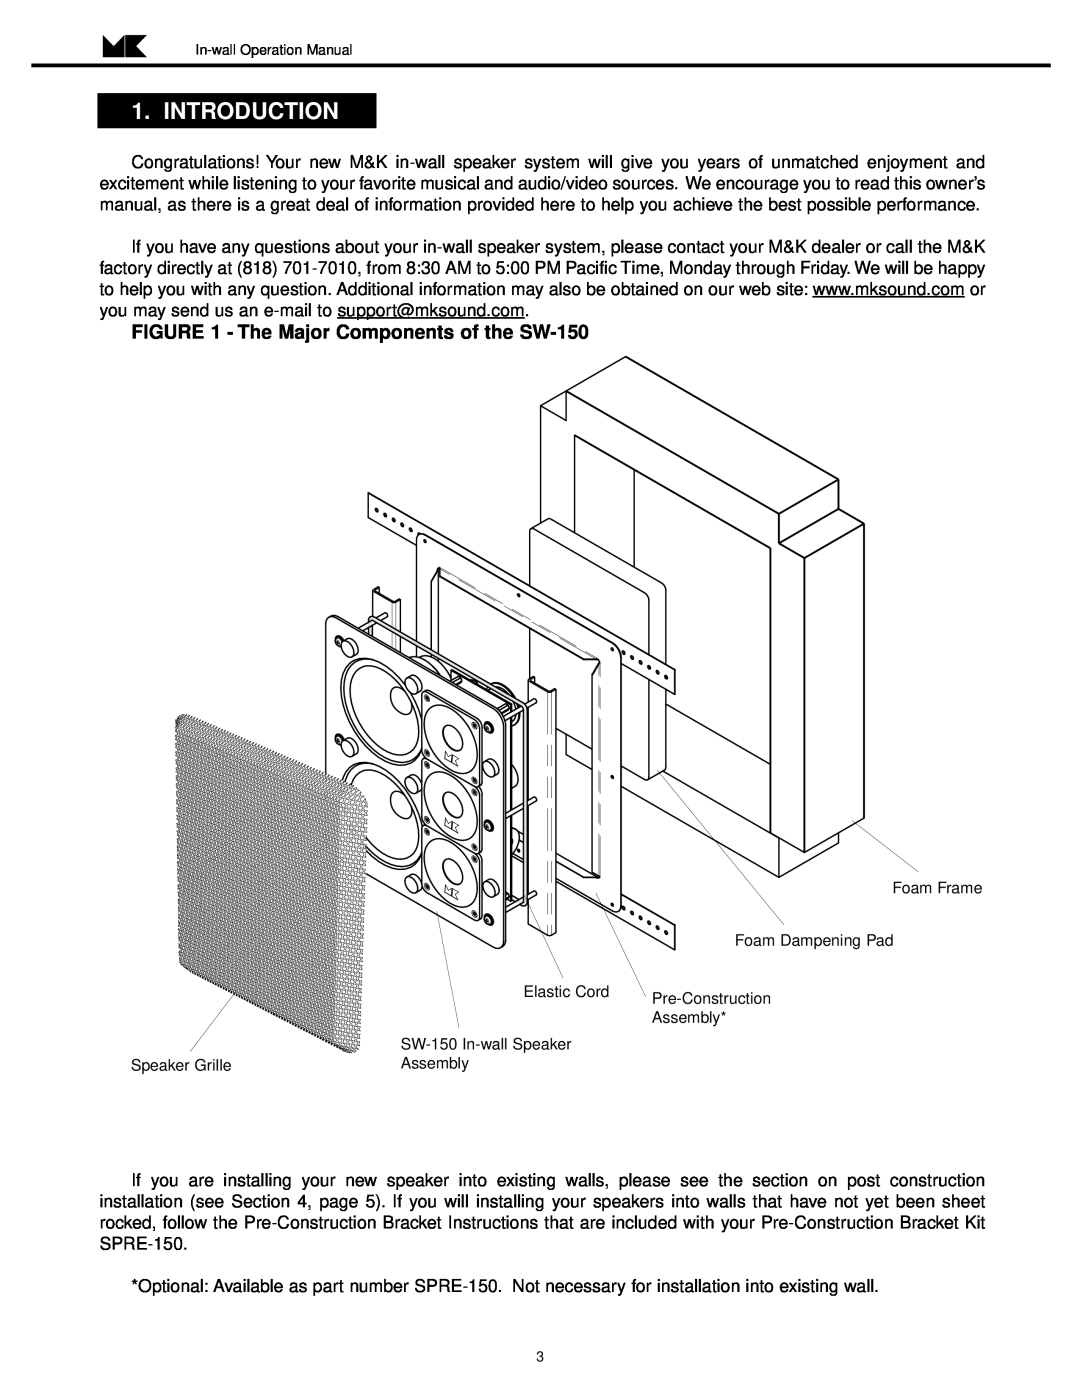 MK Sound operation manual Introduction, The Major Components of the SW-150 